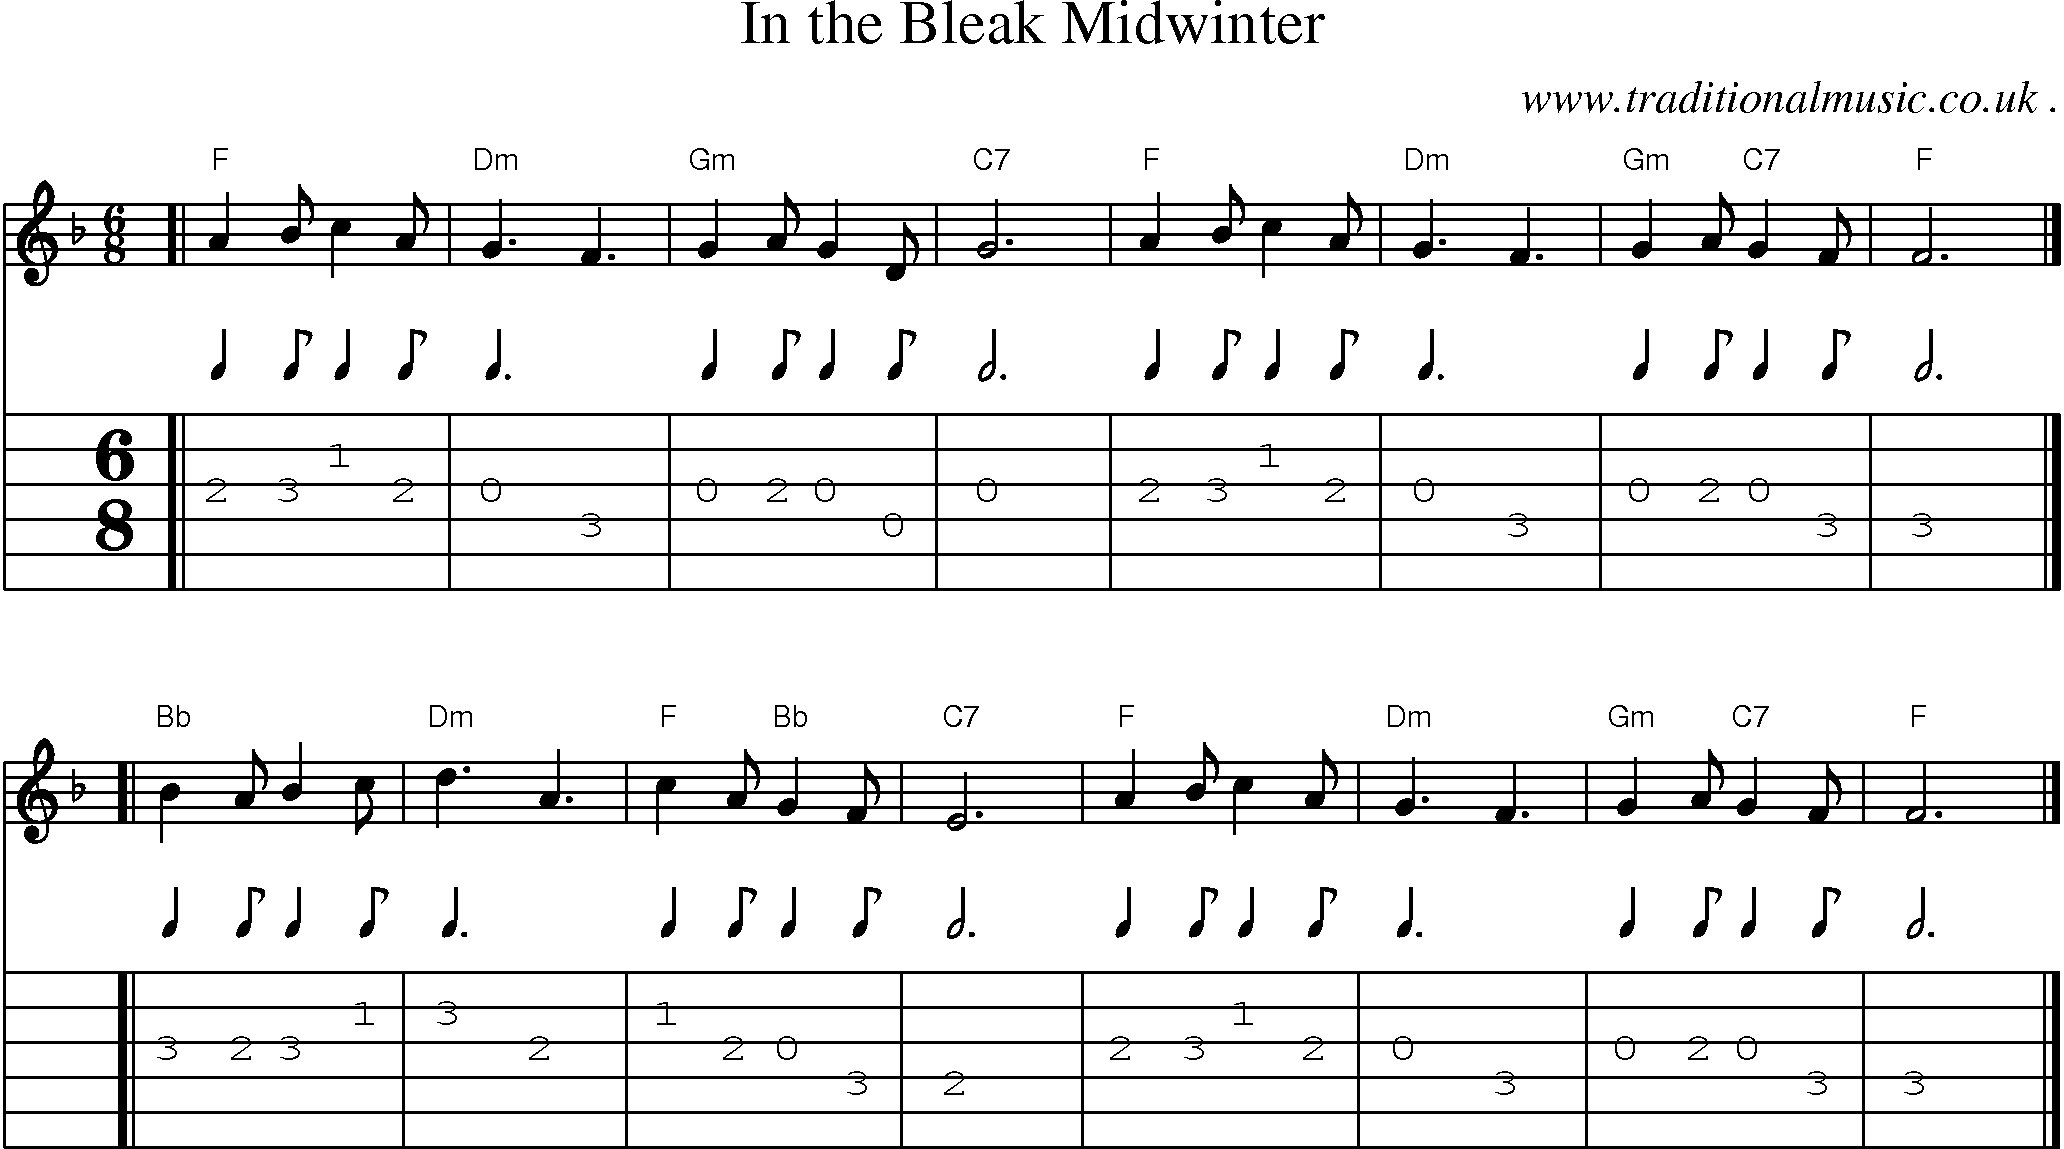 Sheet-music  score, Chords and Guitar Tabs for In The Bleak Midwinter